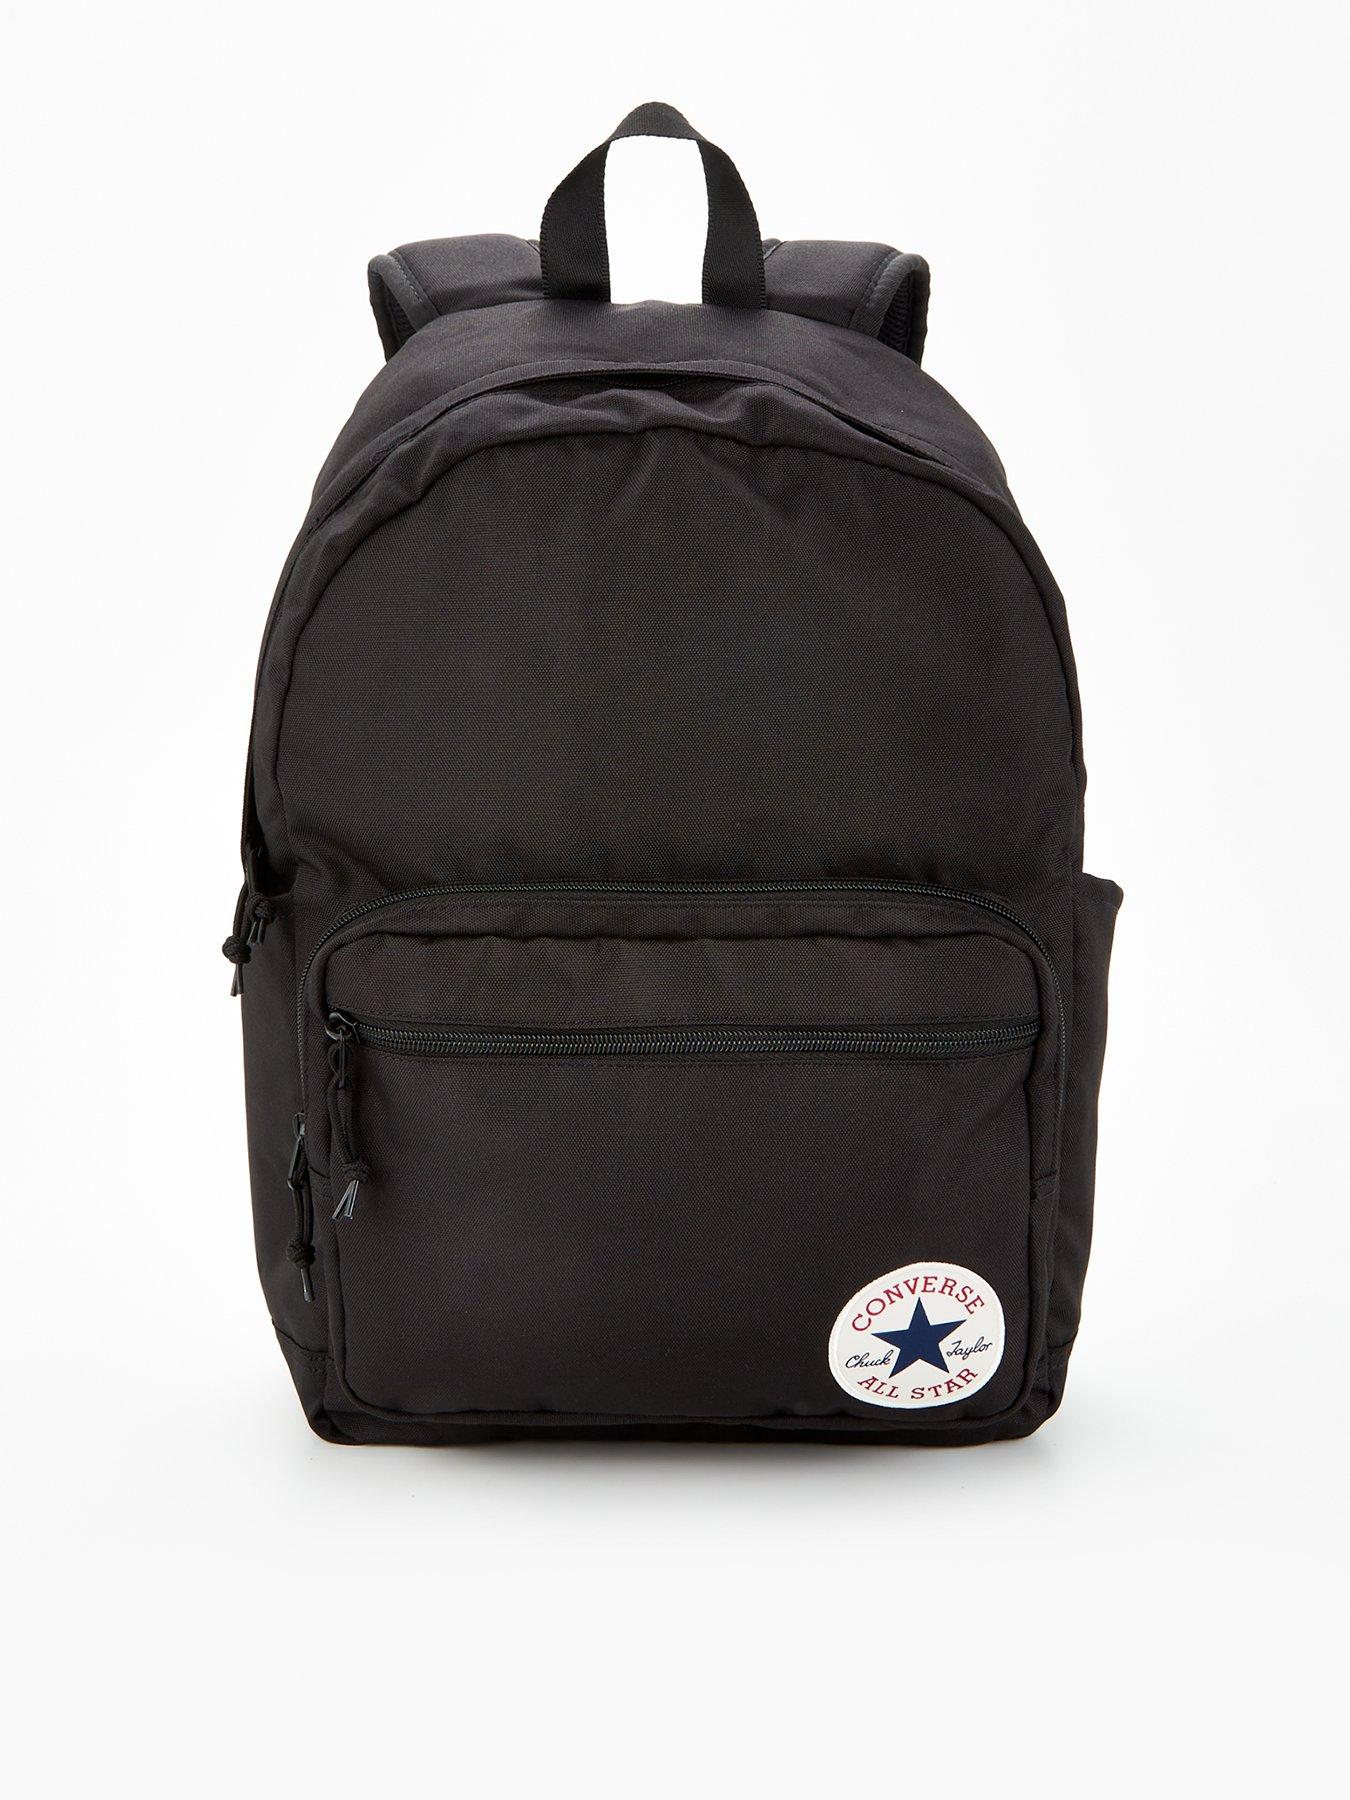 Converse Go 2 Backpack | very.co.uk